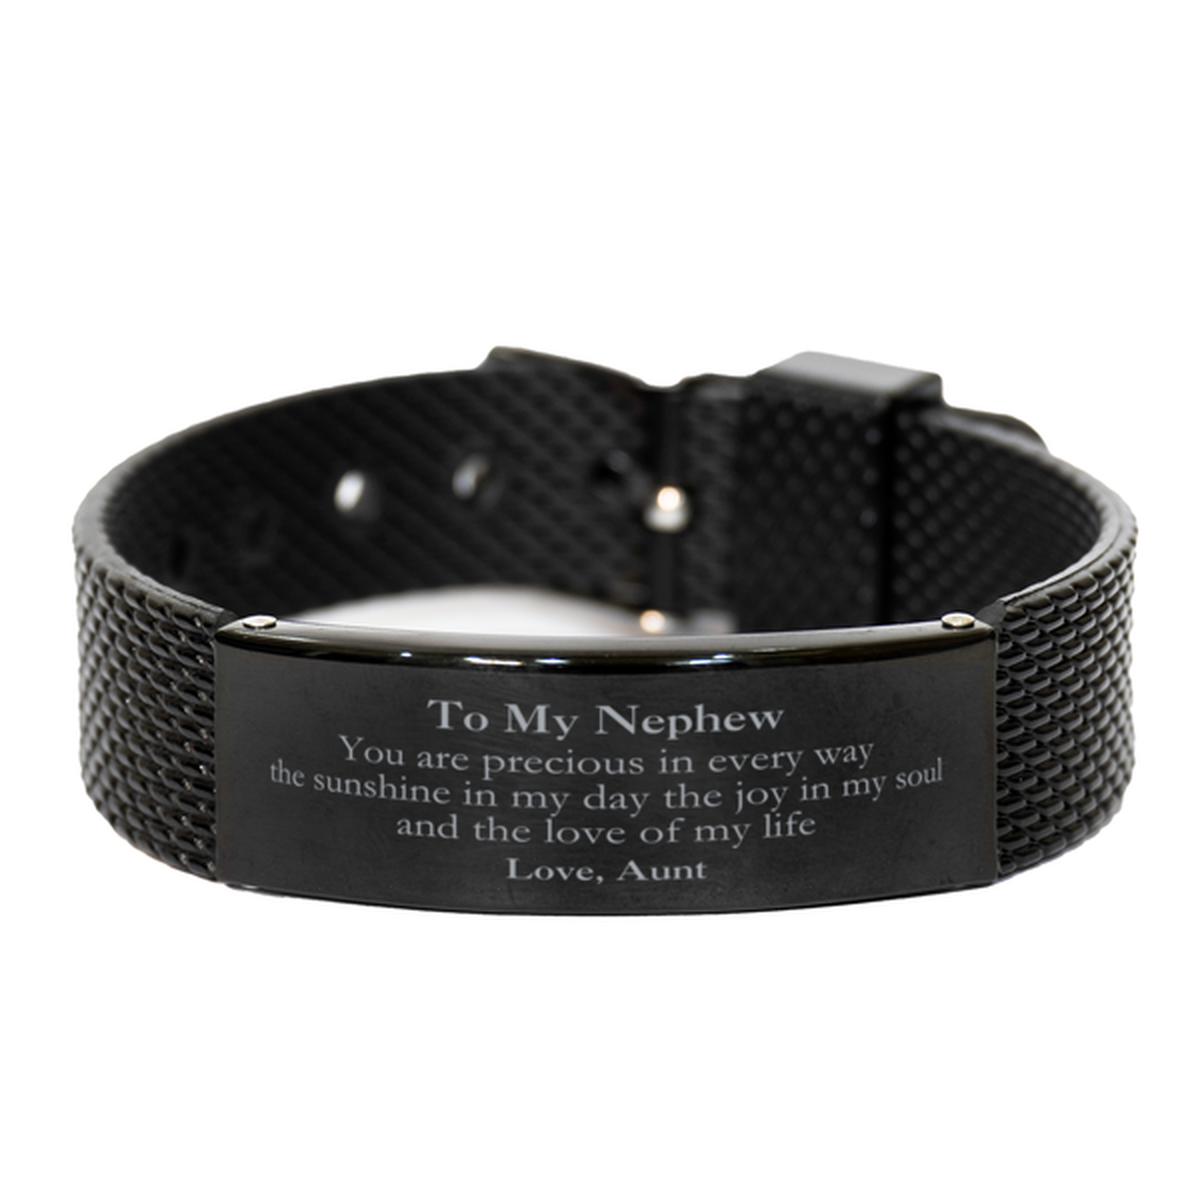 Graduation Gifts for Nephew Black Shark Mesh Bracelet Present from Aunt, Christmas Nephew Birthday Gifts Nephew You are precious in every way the sunshine in my day. Love, Aunt